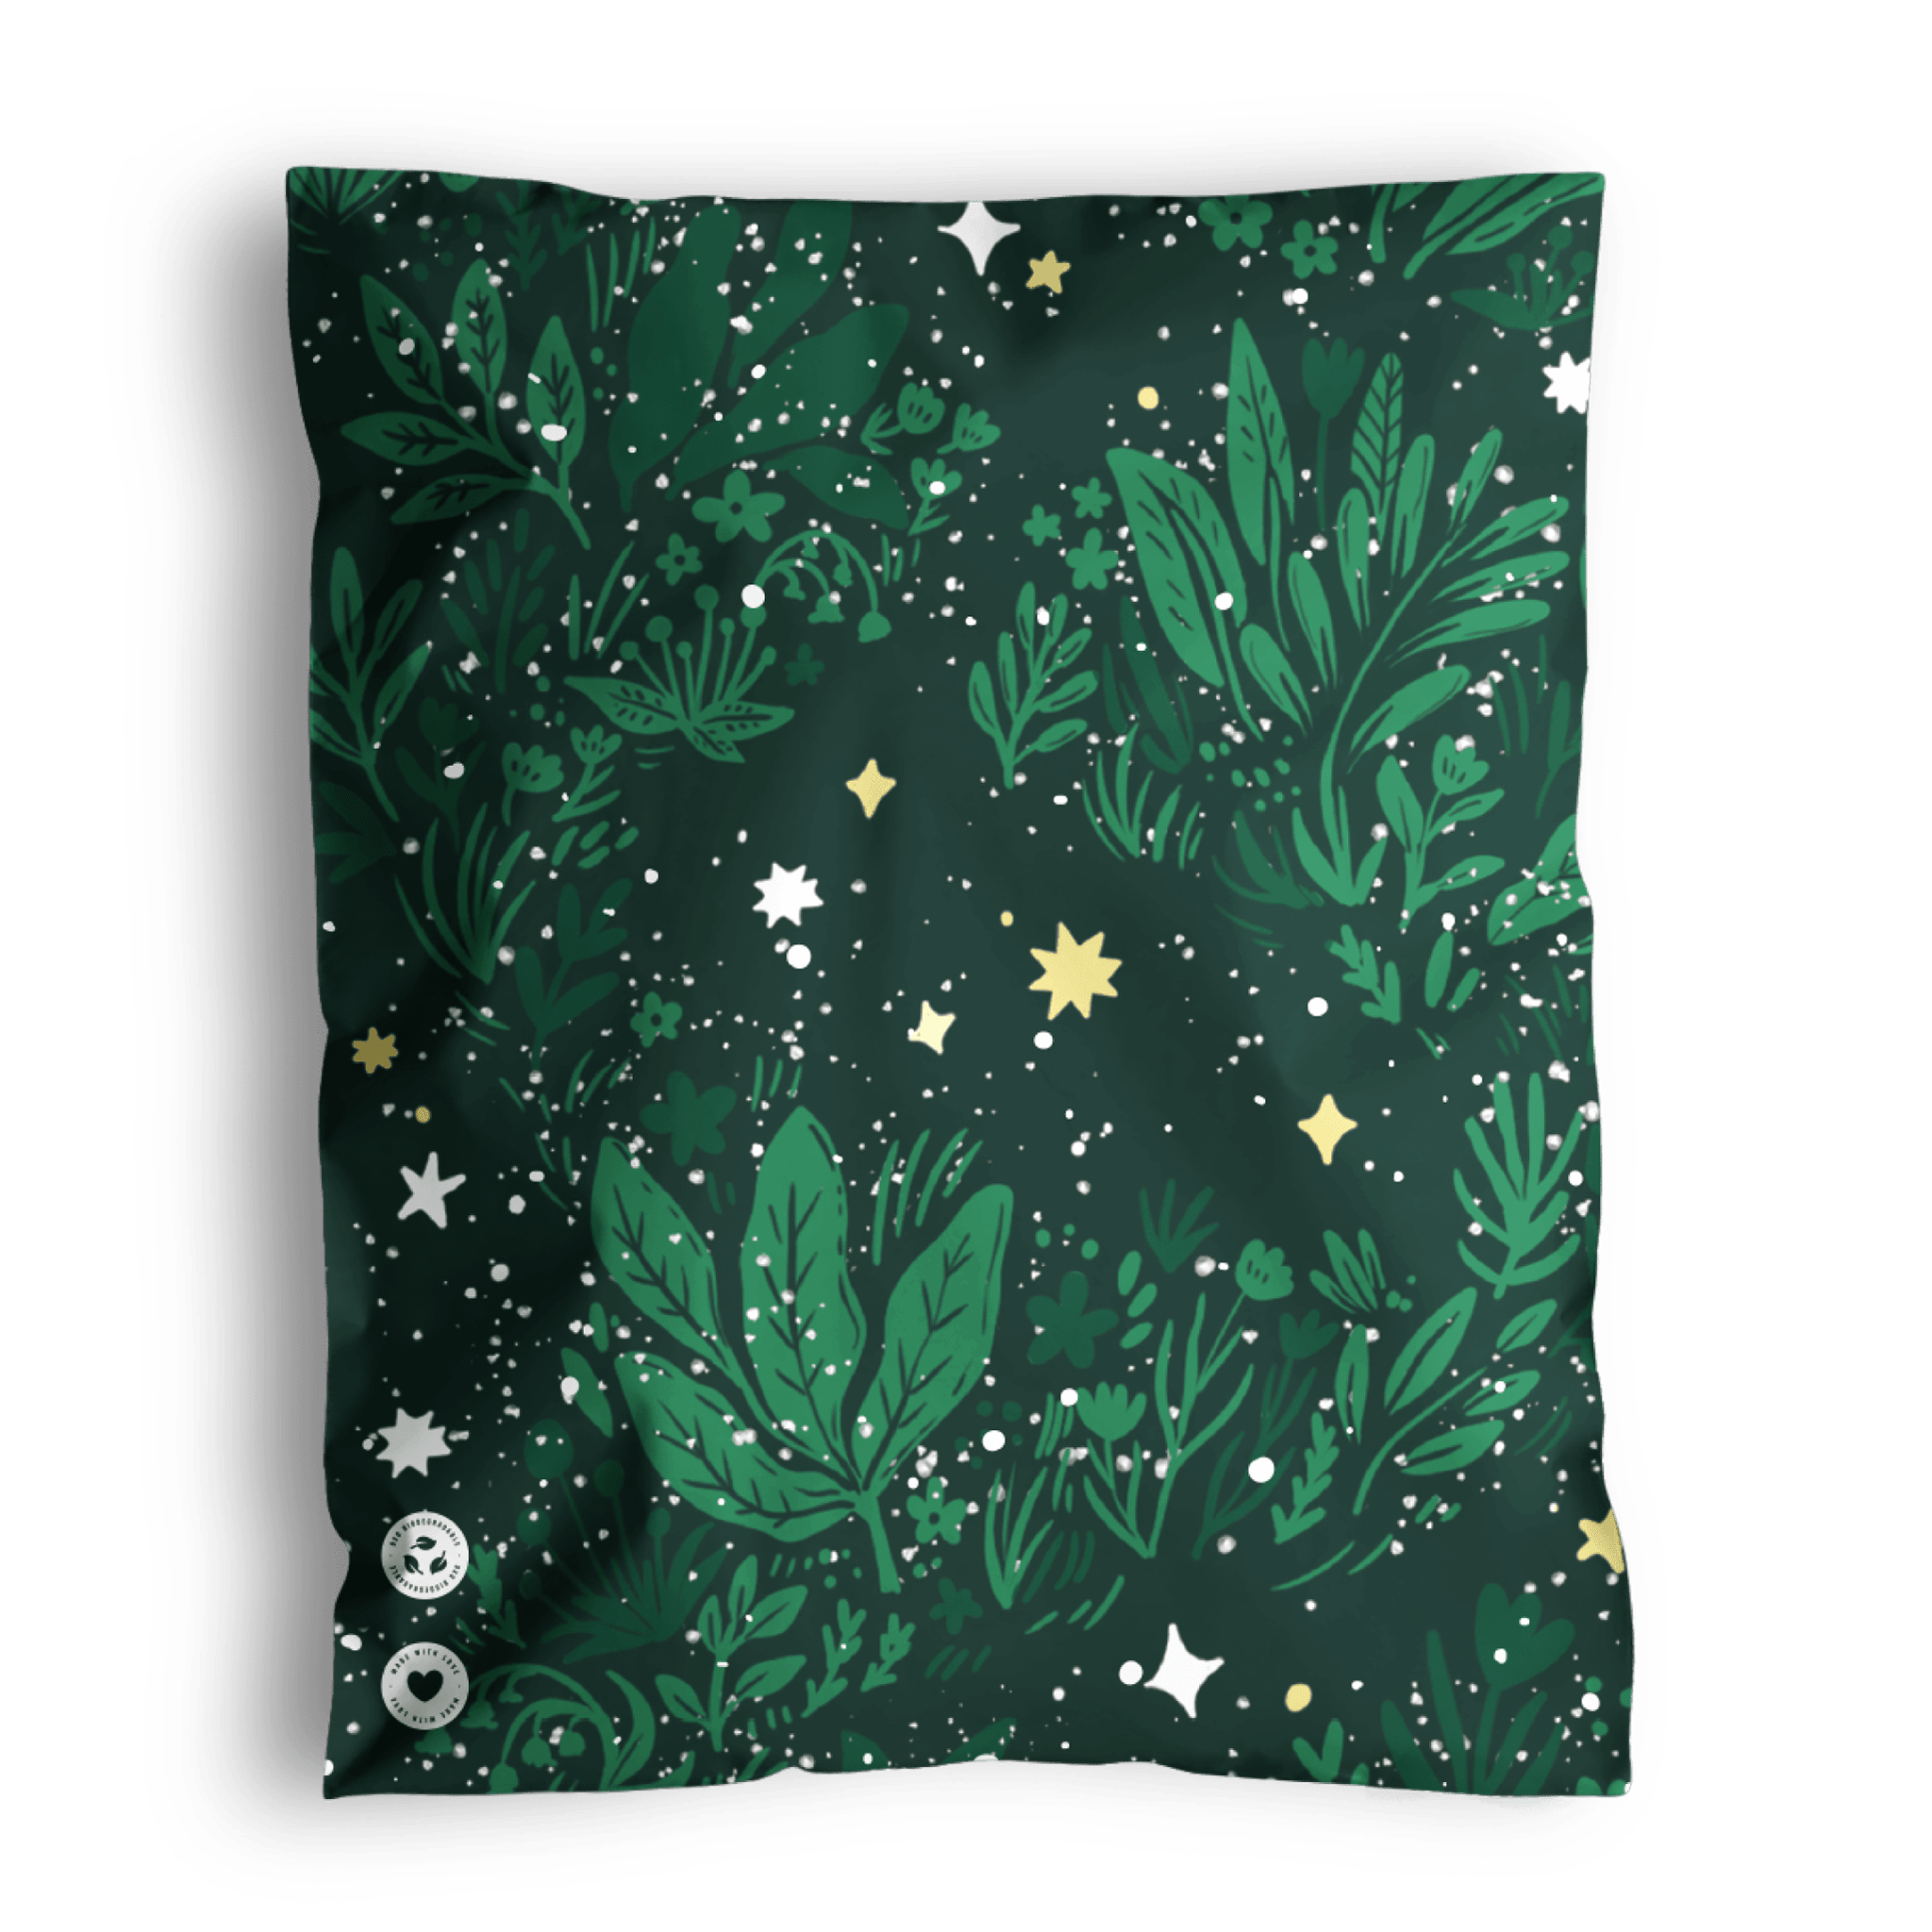 Green scarf with a botanical and celestial pattern, displayed flat in impack.co's Midnight Lush Mailer 14.5" x 19".